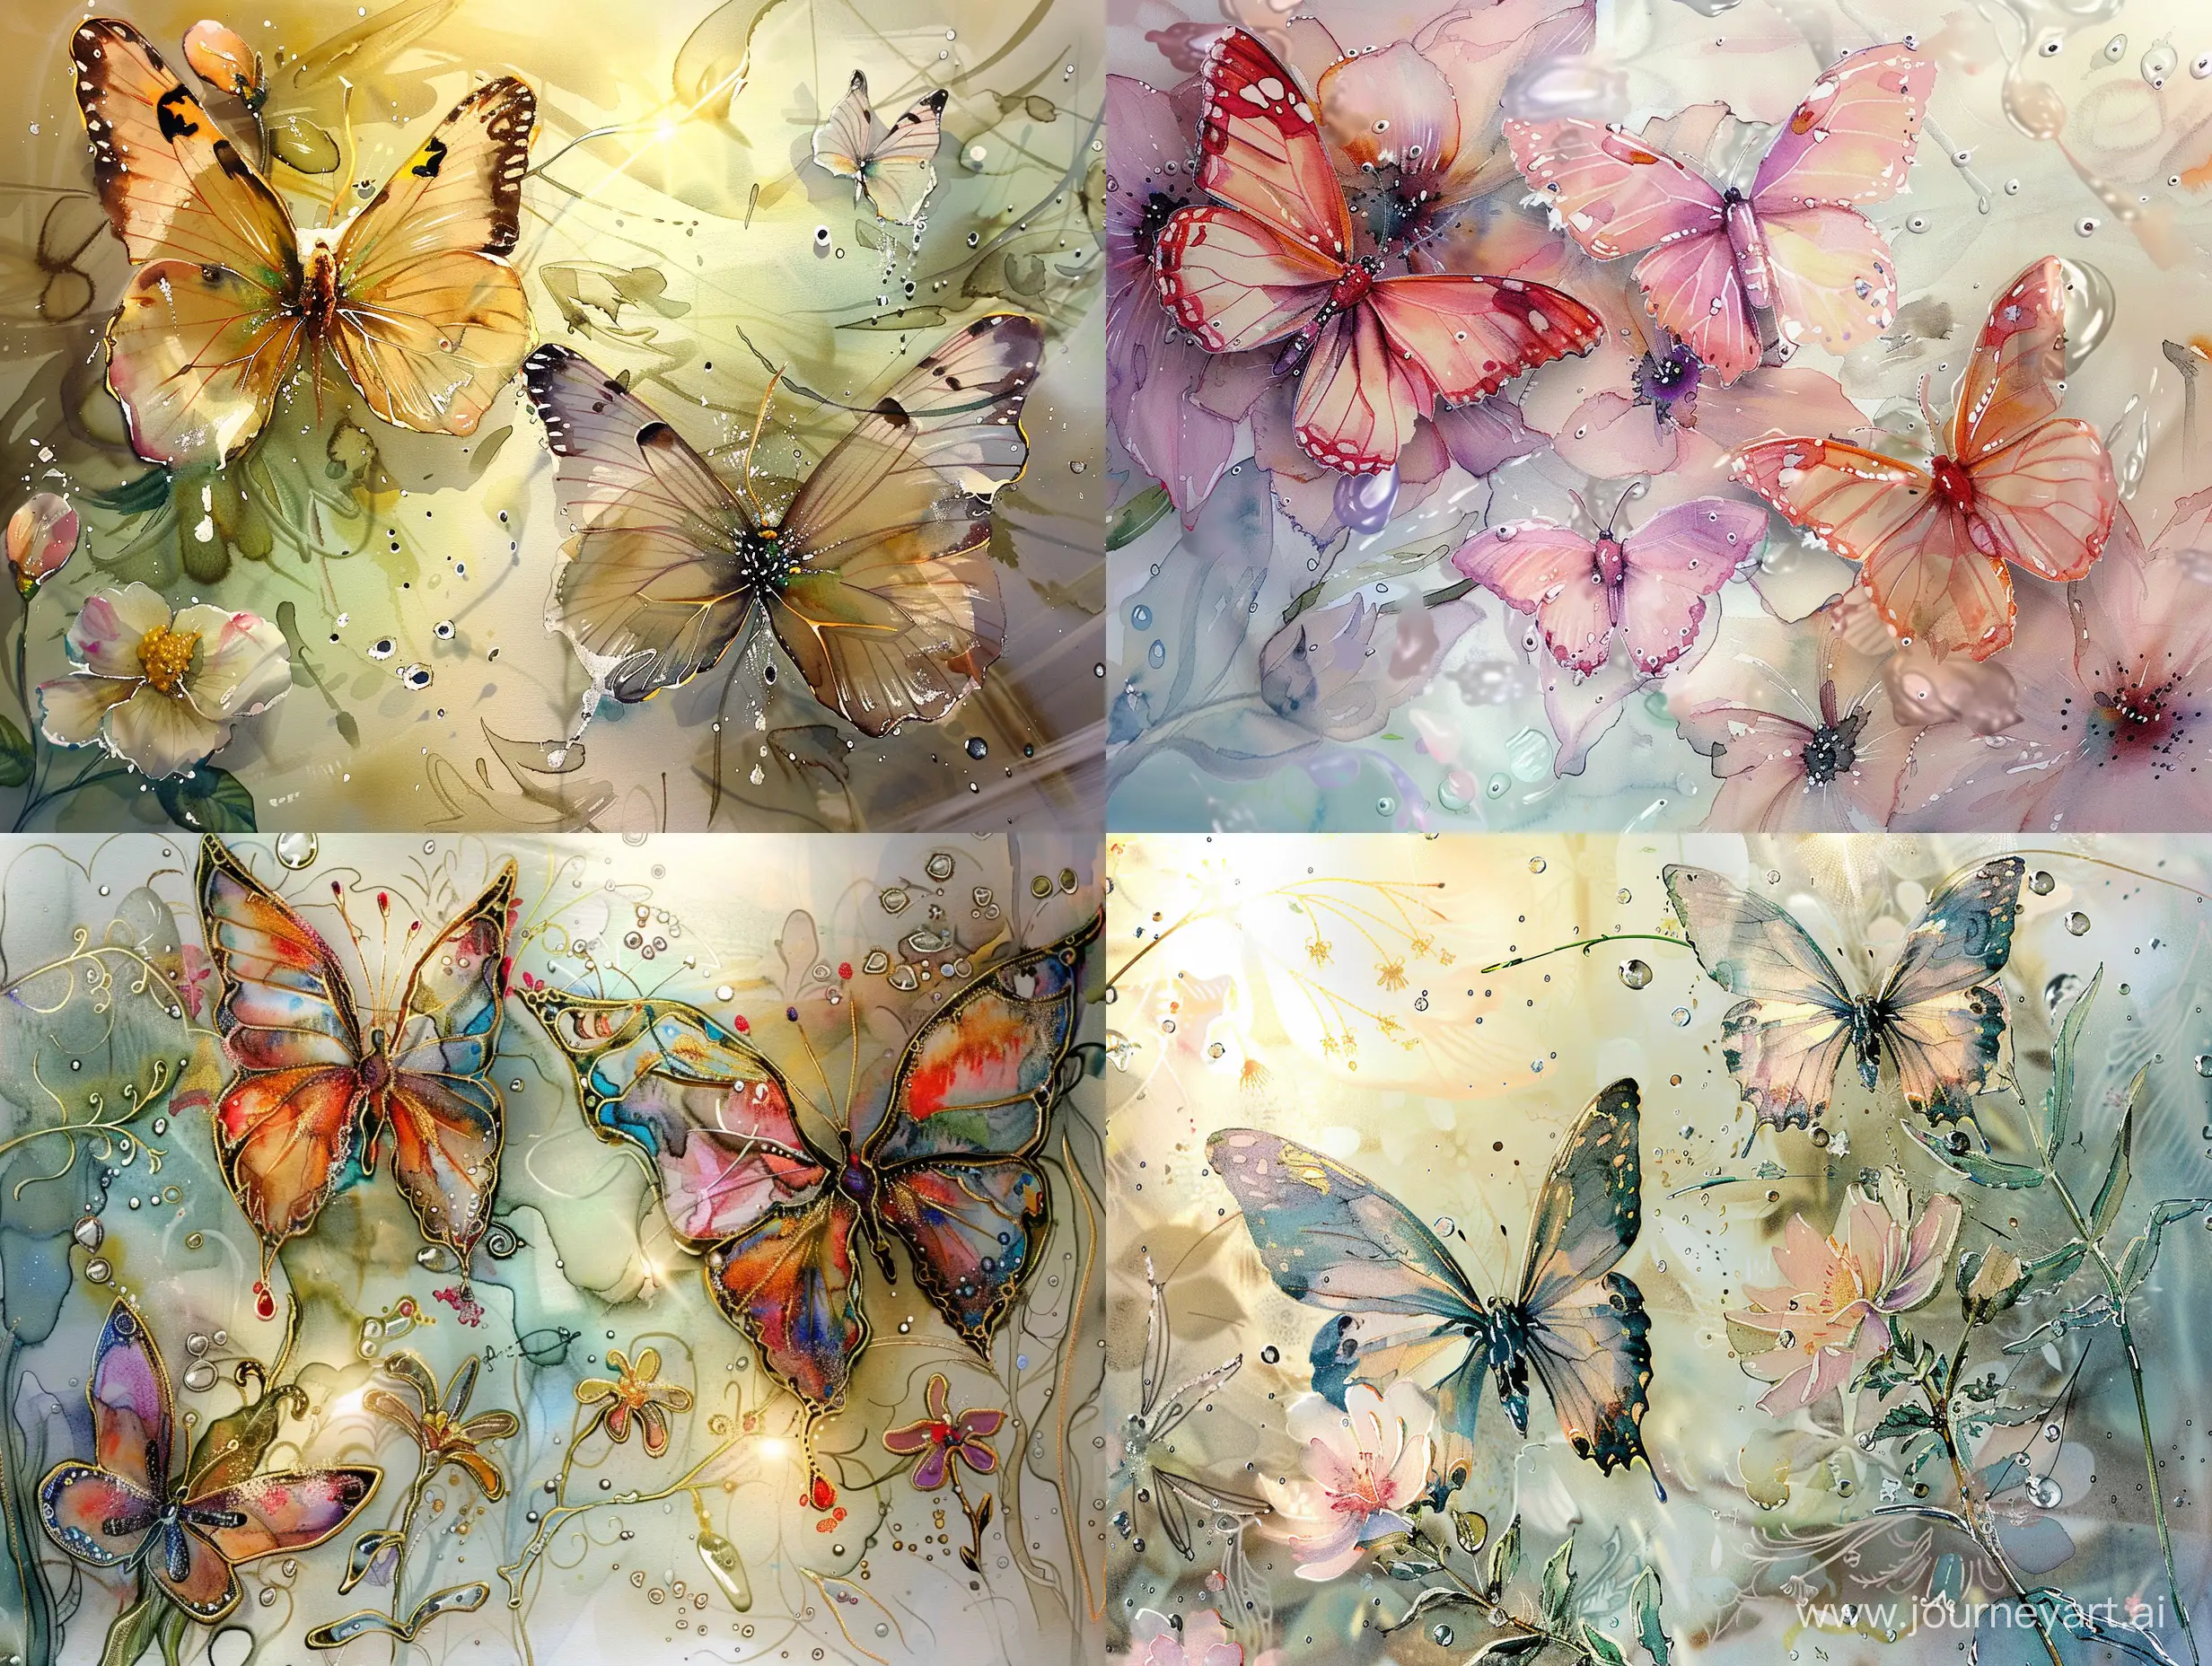 Butterflies and flowers, delicate fantasy voluminous multifaceted layered delicate pastel alcohol watercolor with detailing, glass transparency, gleams, sunbeams, splashing drips, drops, paints, dew --v 6 --ar 4:3 --no 51884